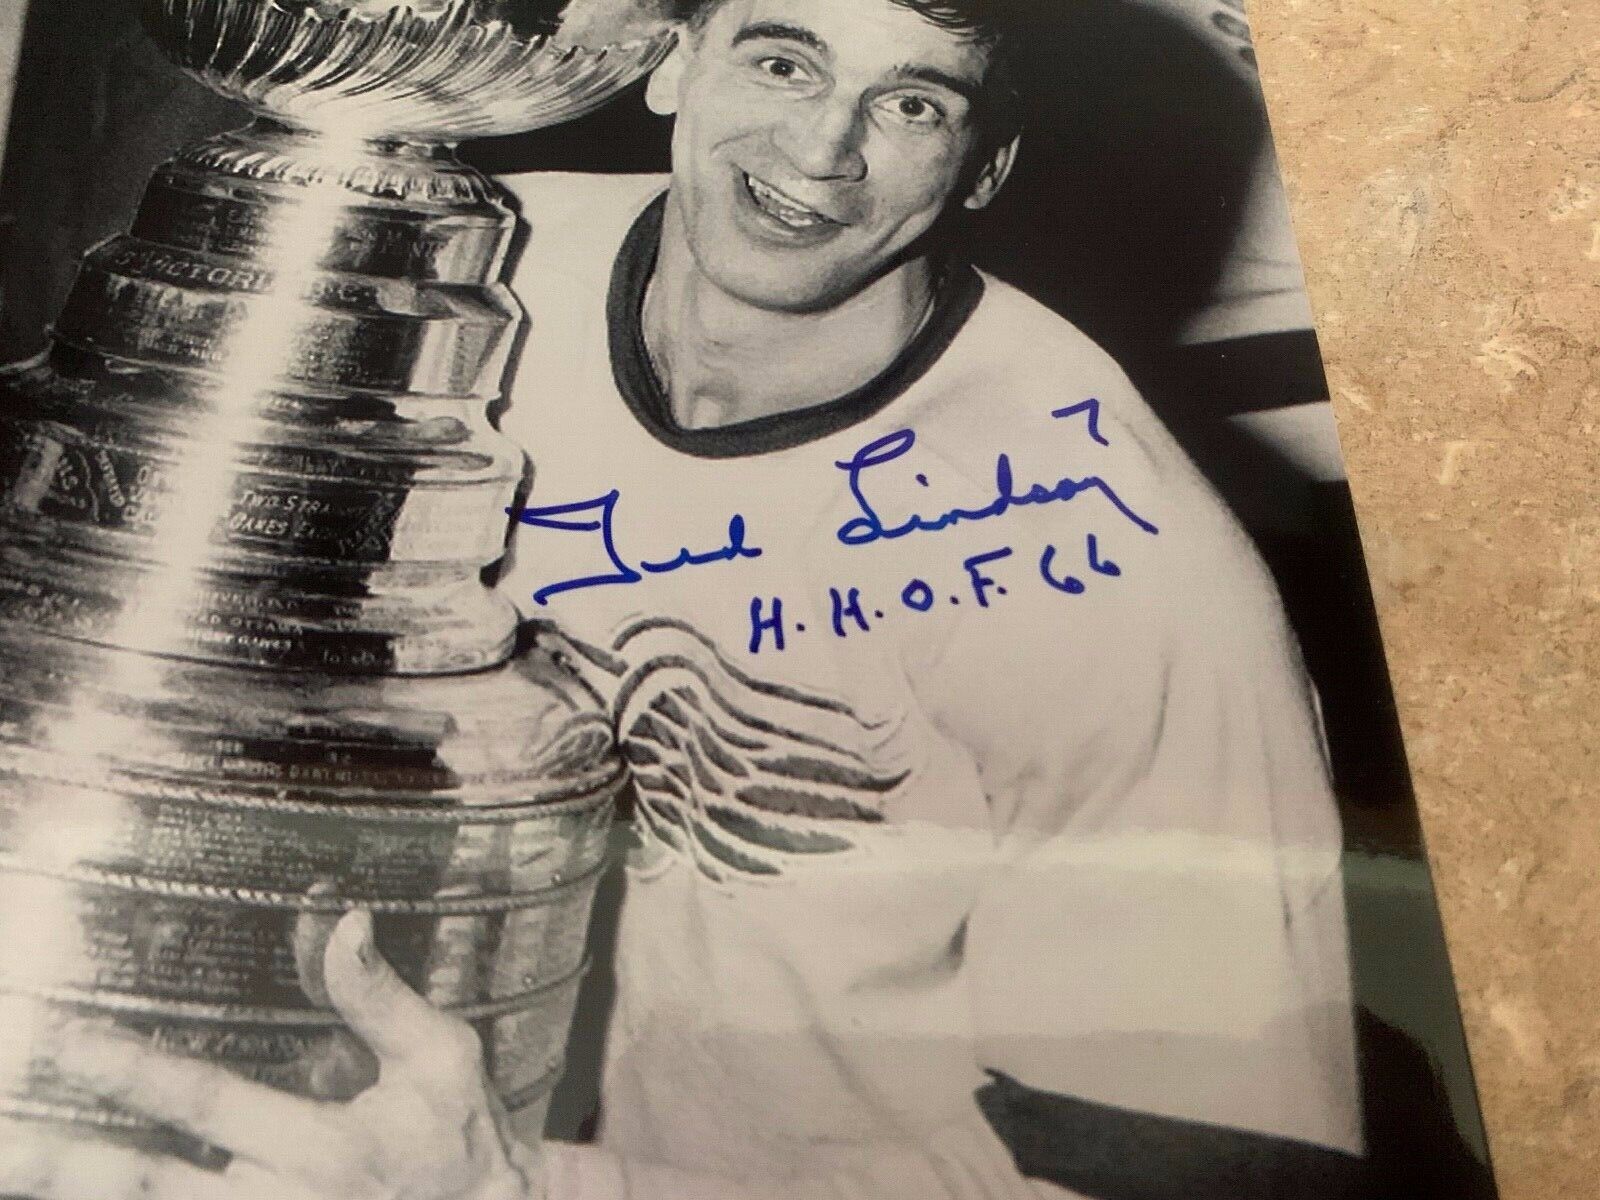 Ted Lindsay Red Wings HHOF 1966 Autographed 8x10 Hockey Photo 3 JSA COA HH75180